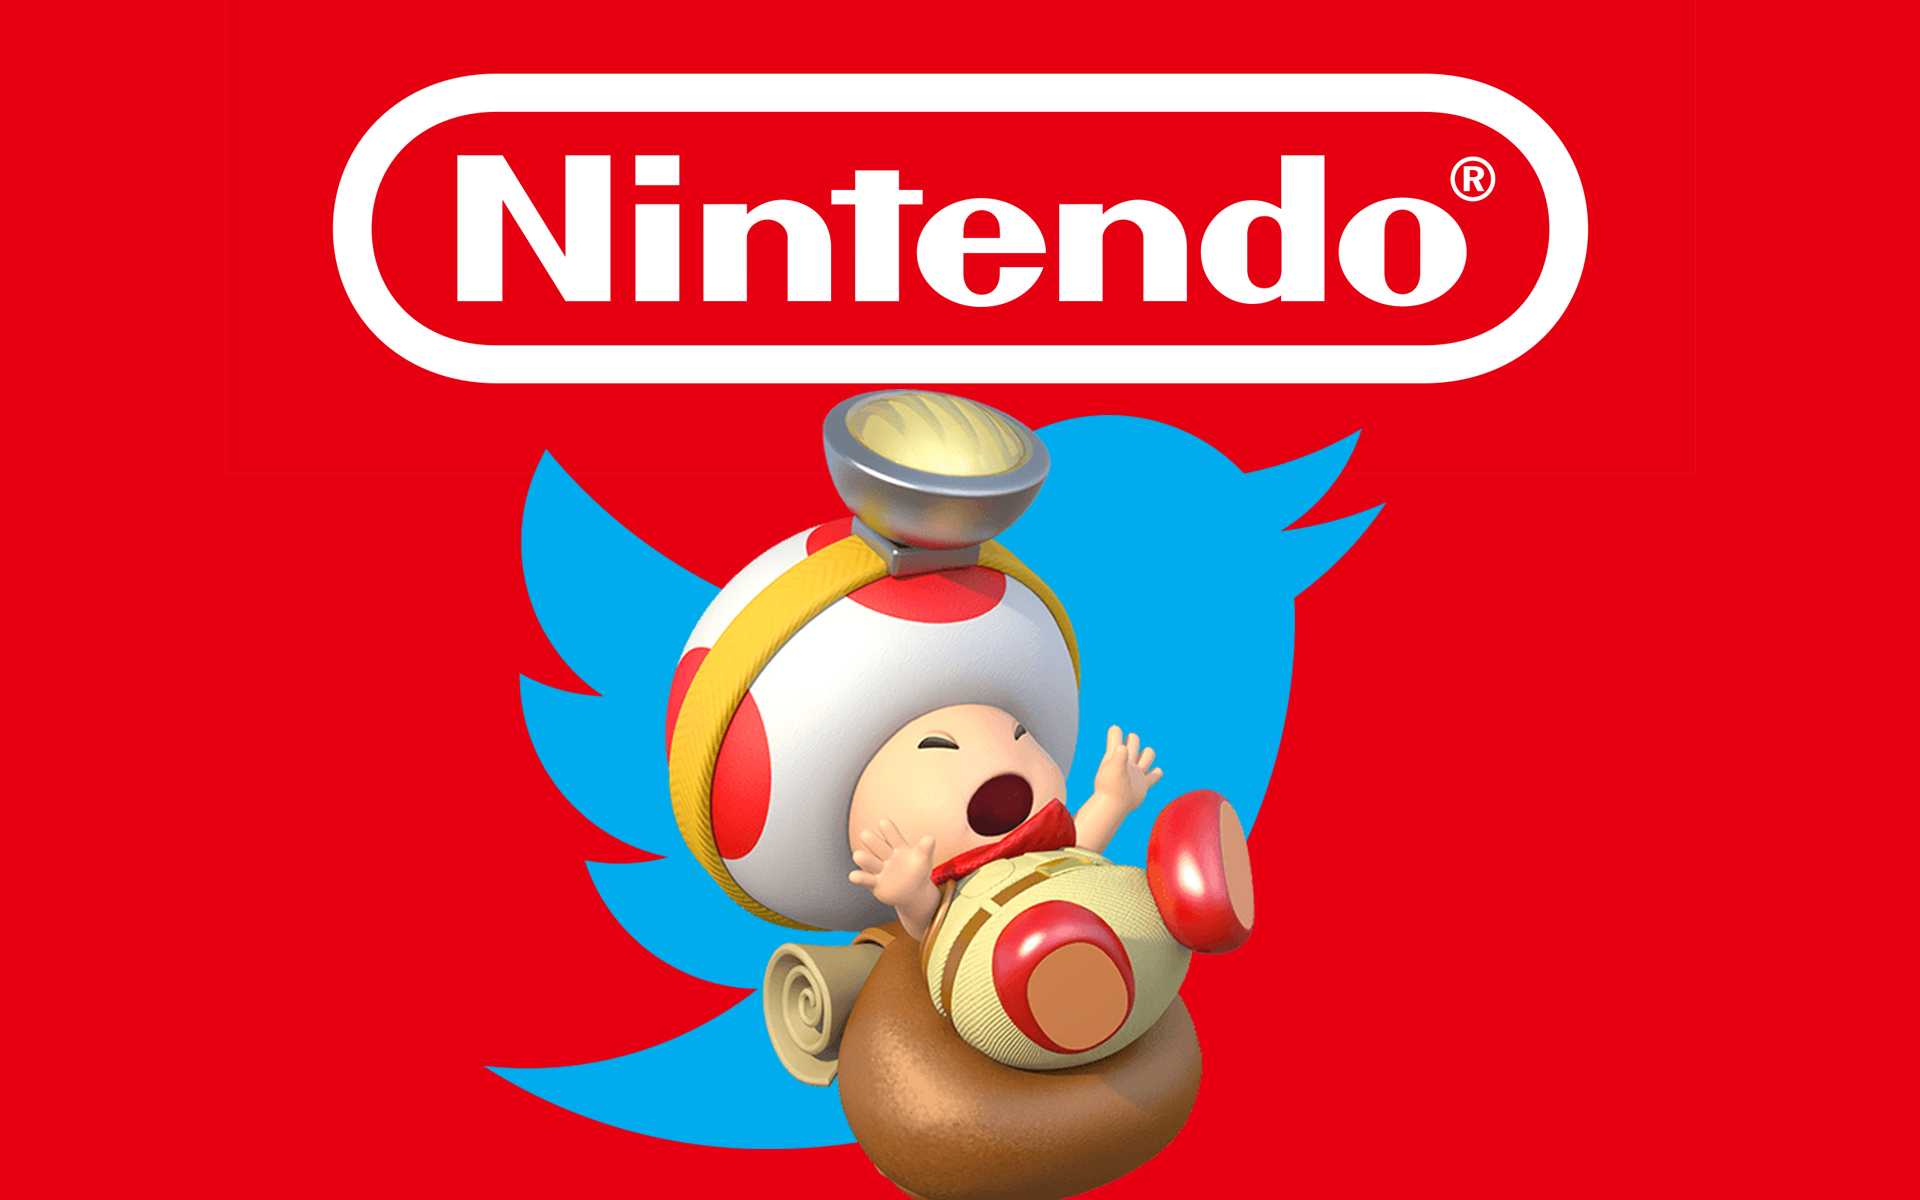 download switch toad game